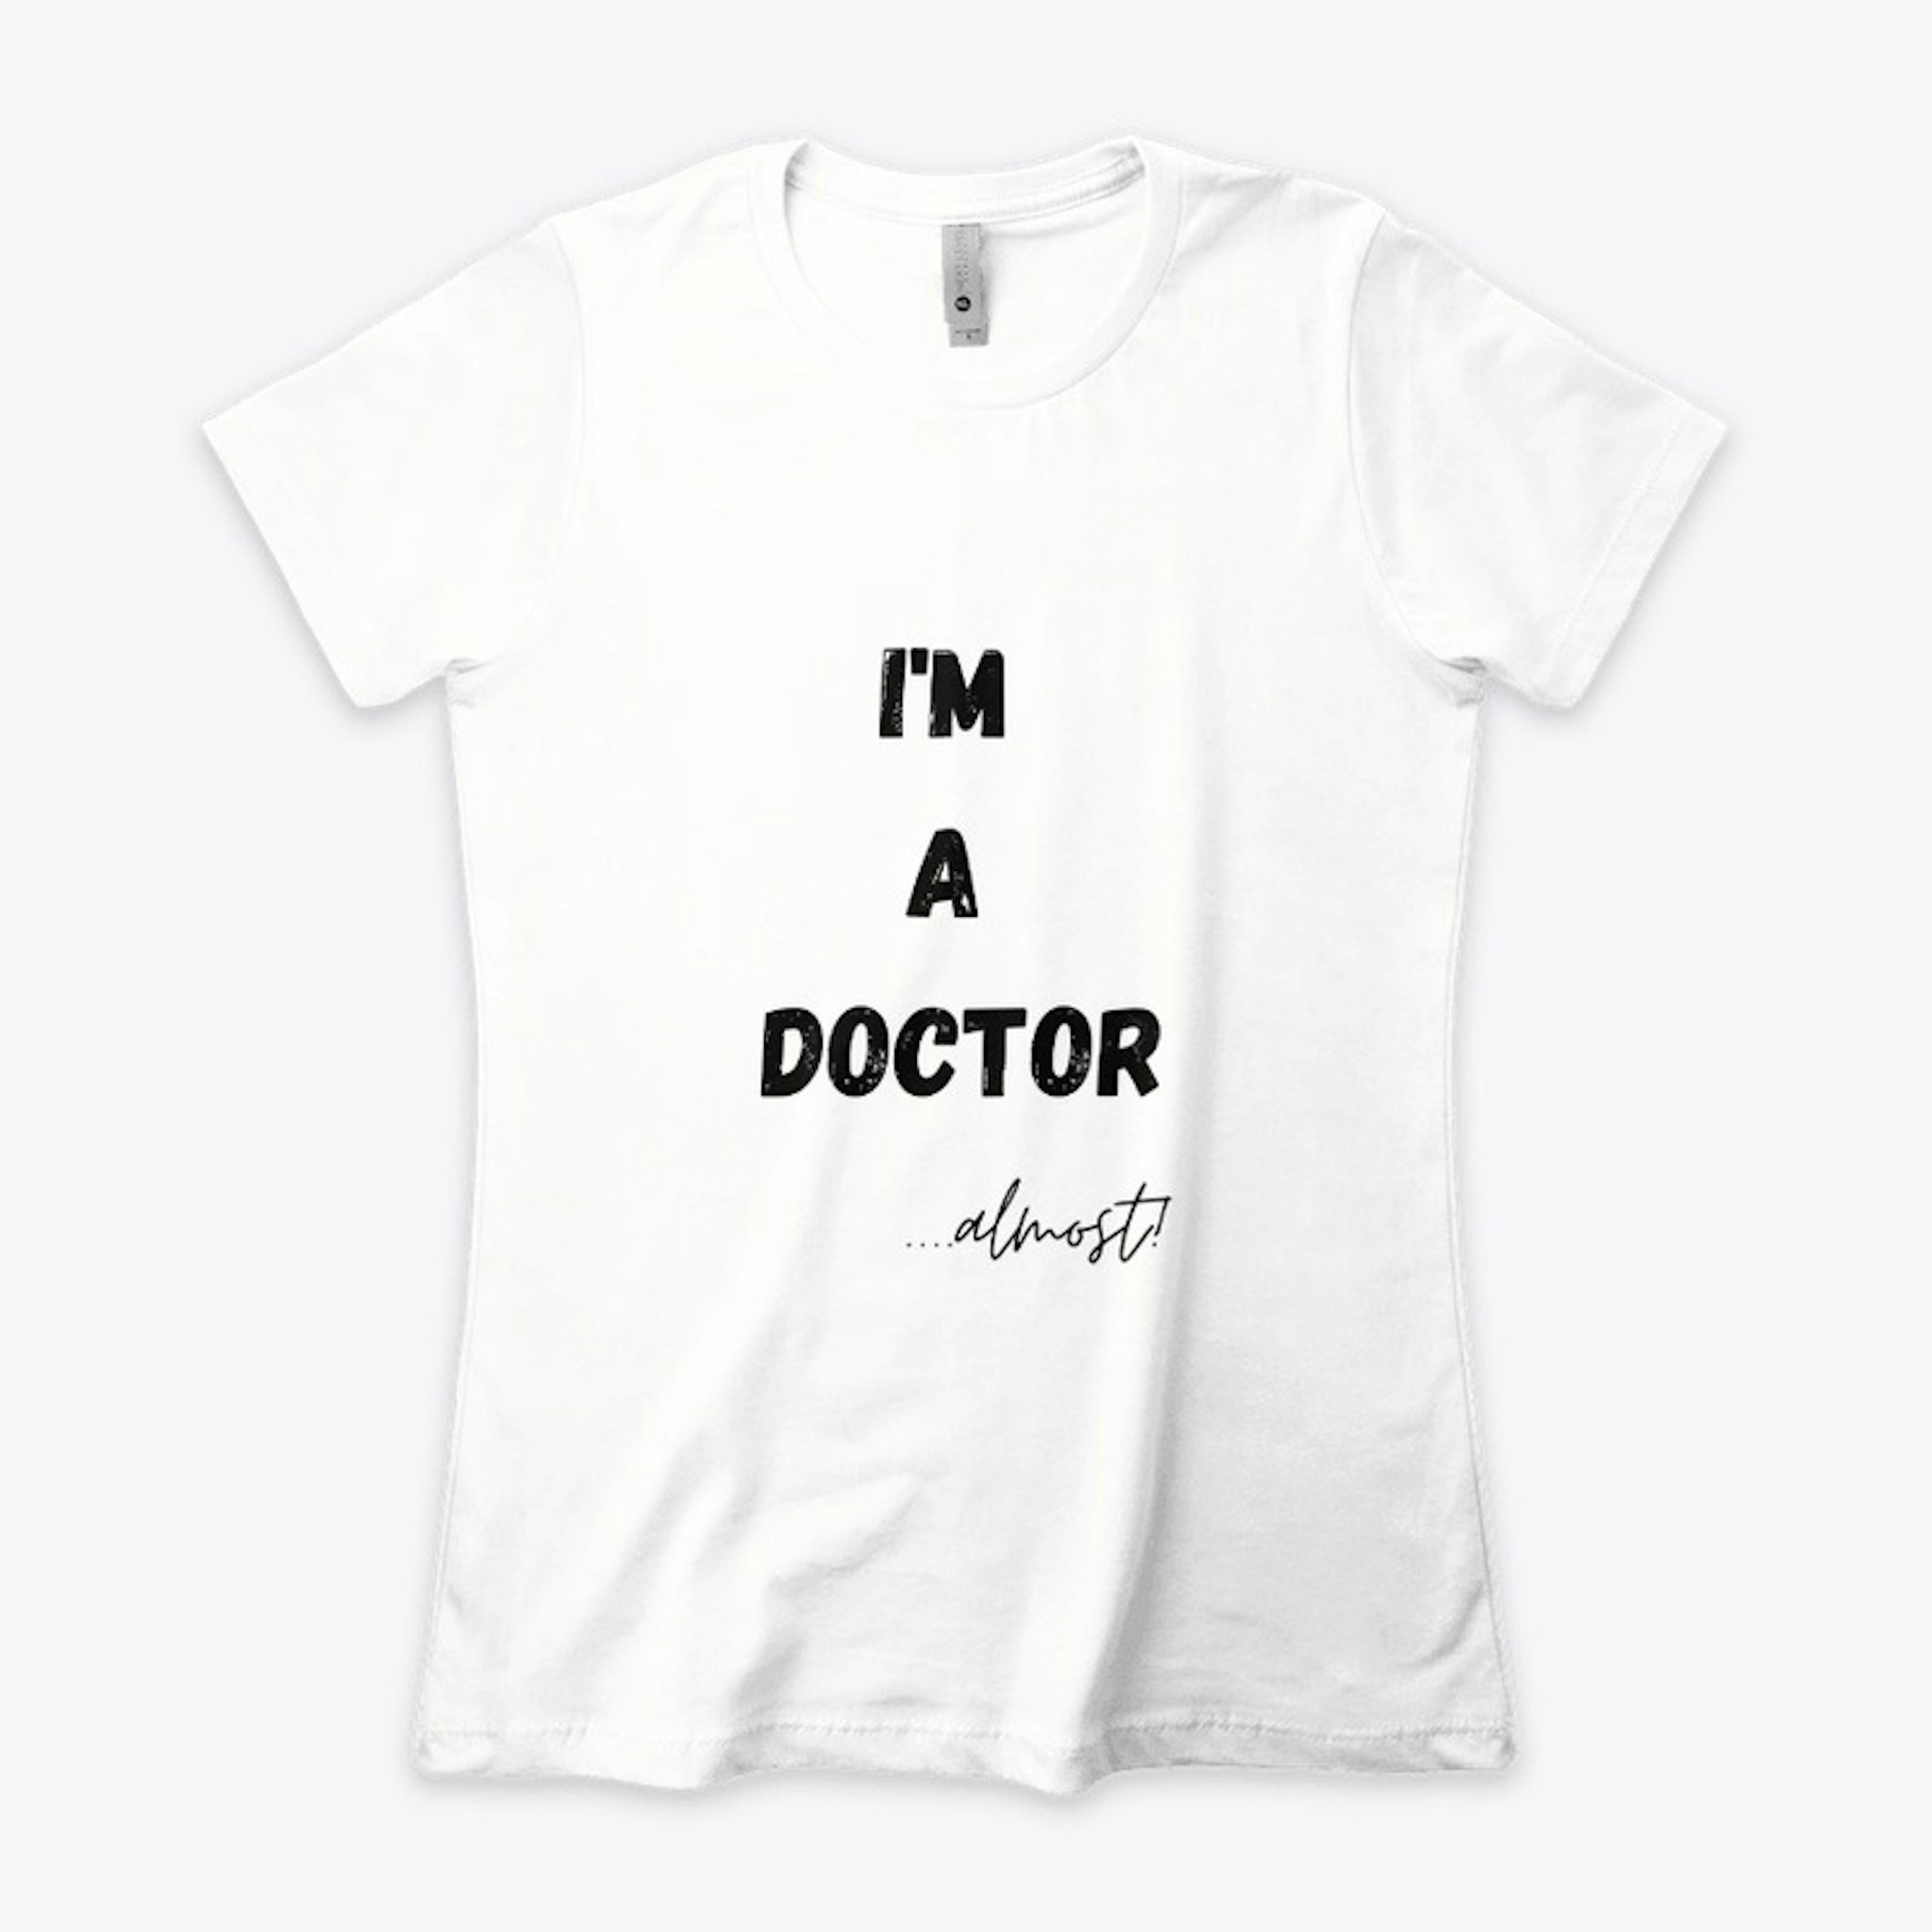 I'm a Doctor... Almost!